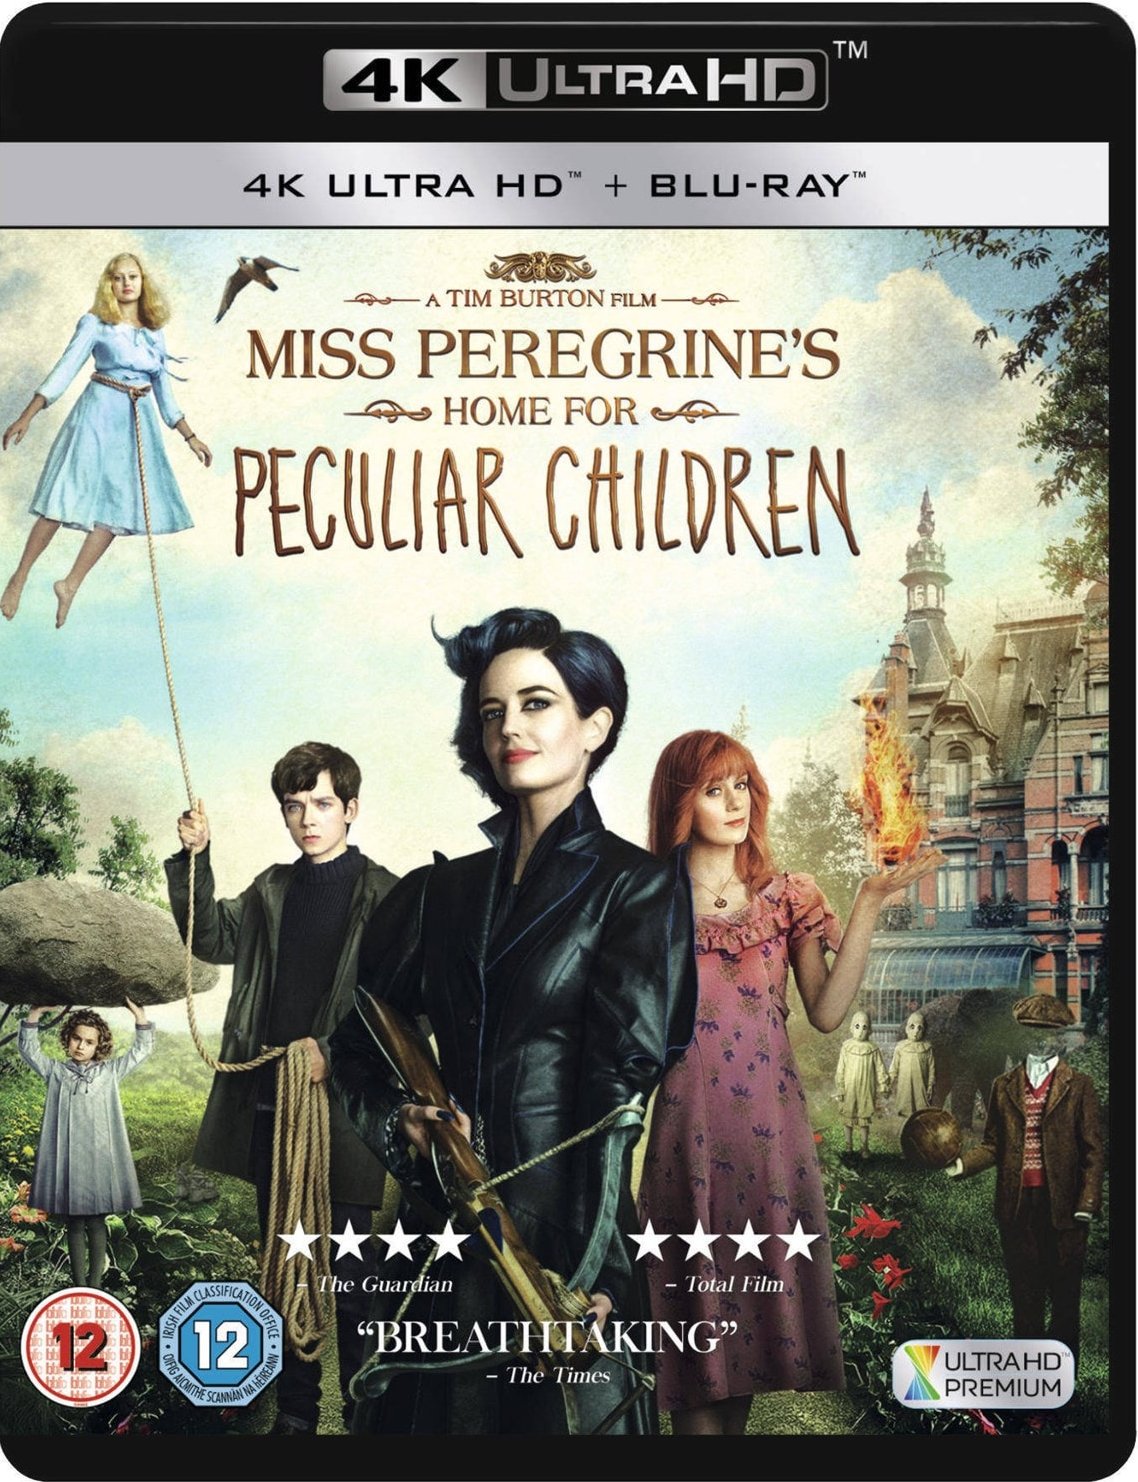 Miss Peregrine's Home for Peculiar Children 2016 (4K ULTRA HD + BLURAY)